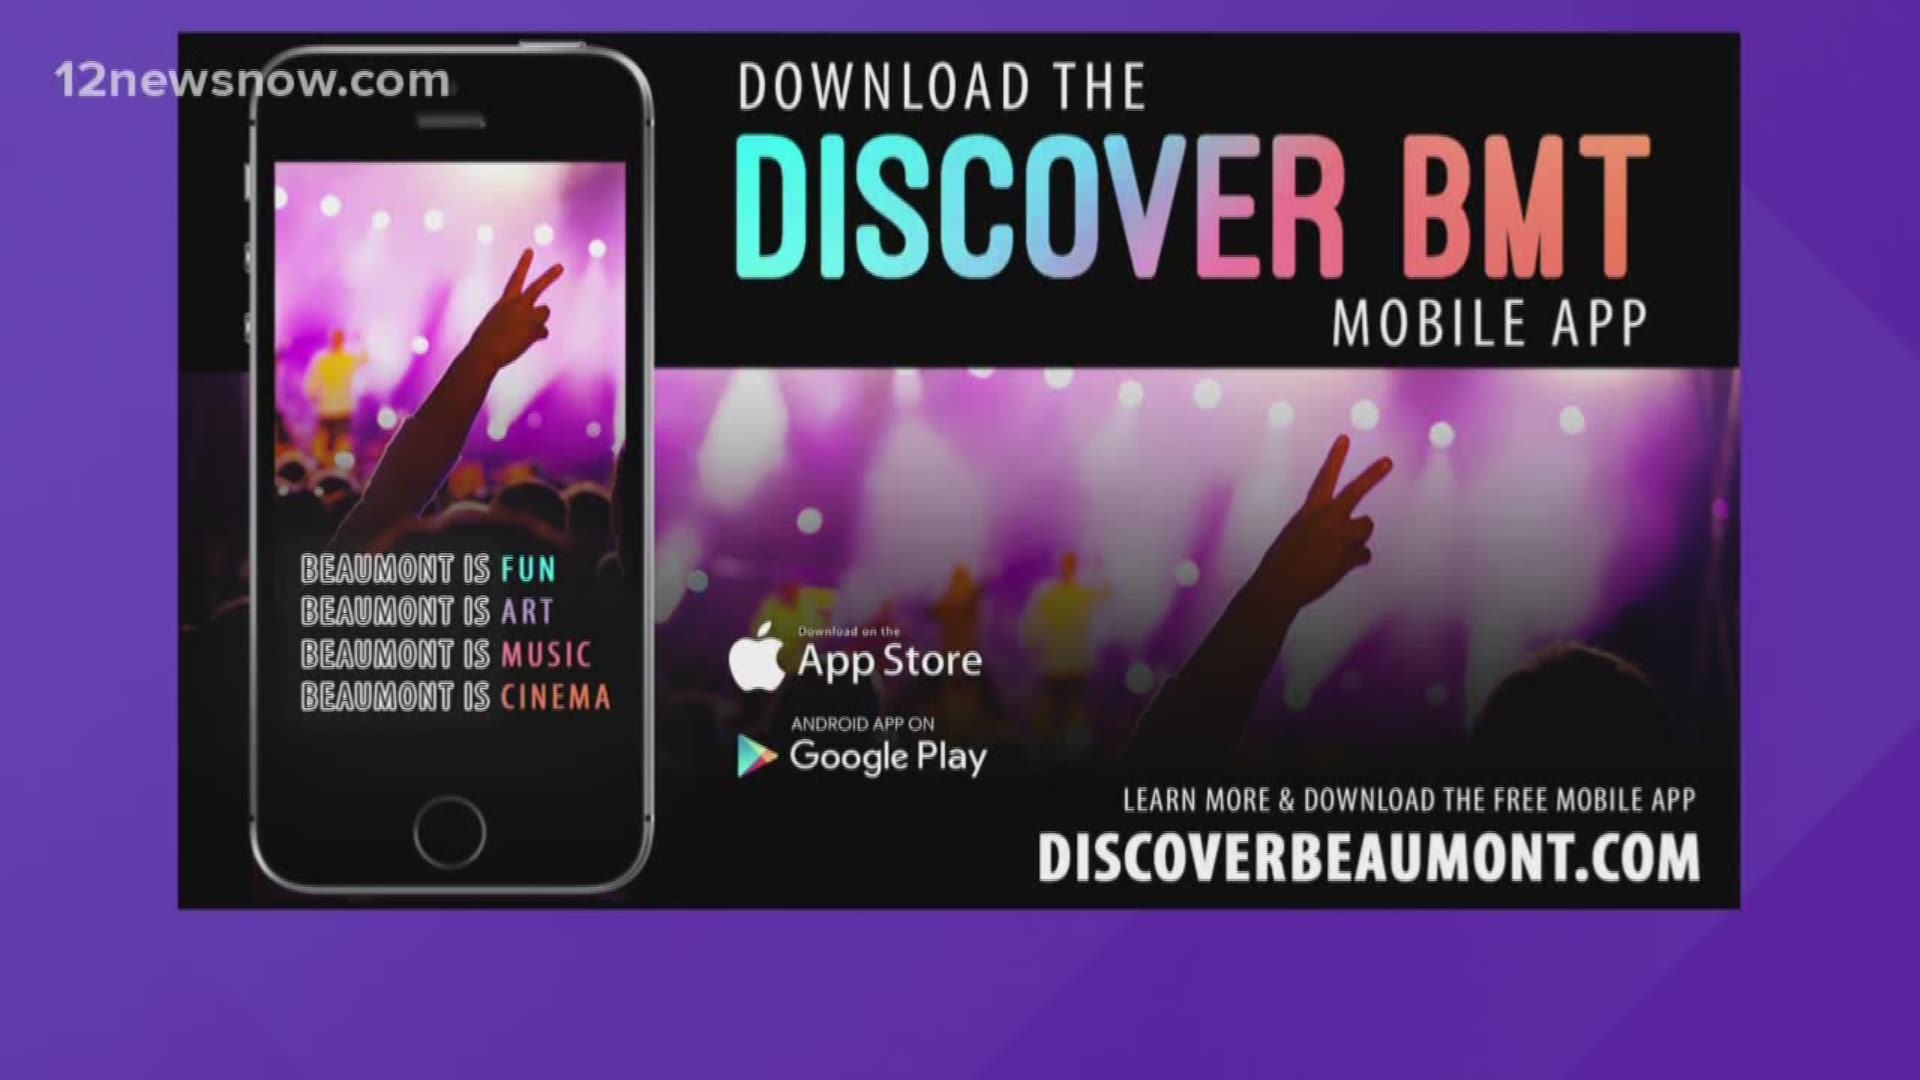 For more information on local events visit discoverbeaumont.com or download the Discover BMT app.